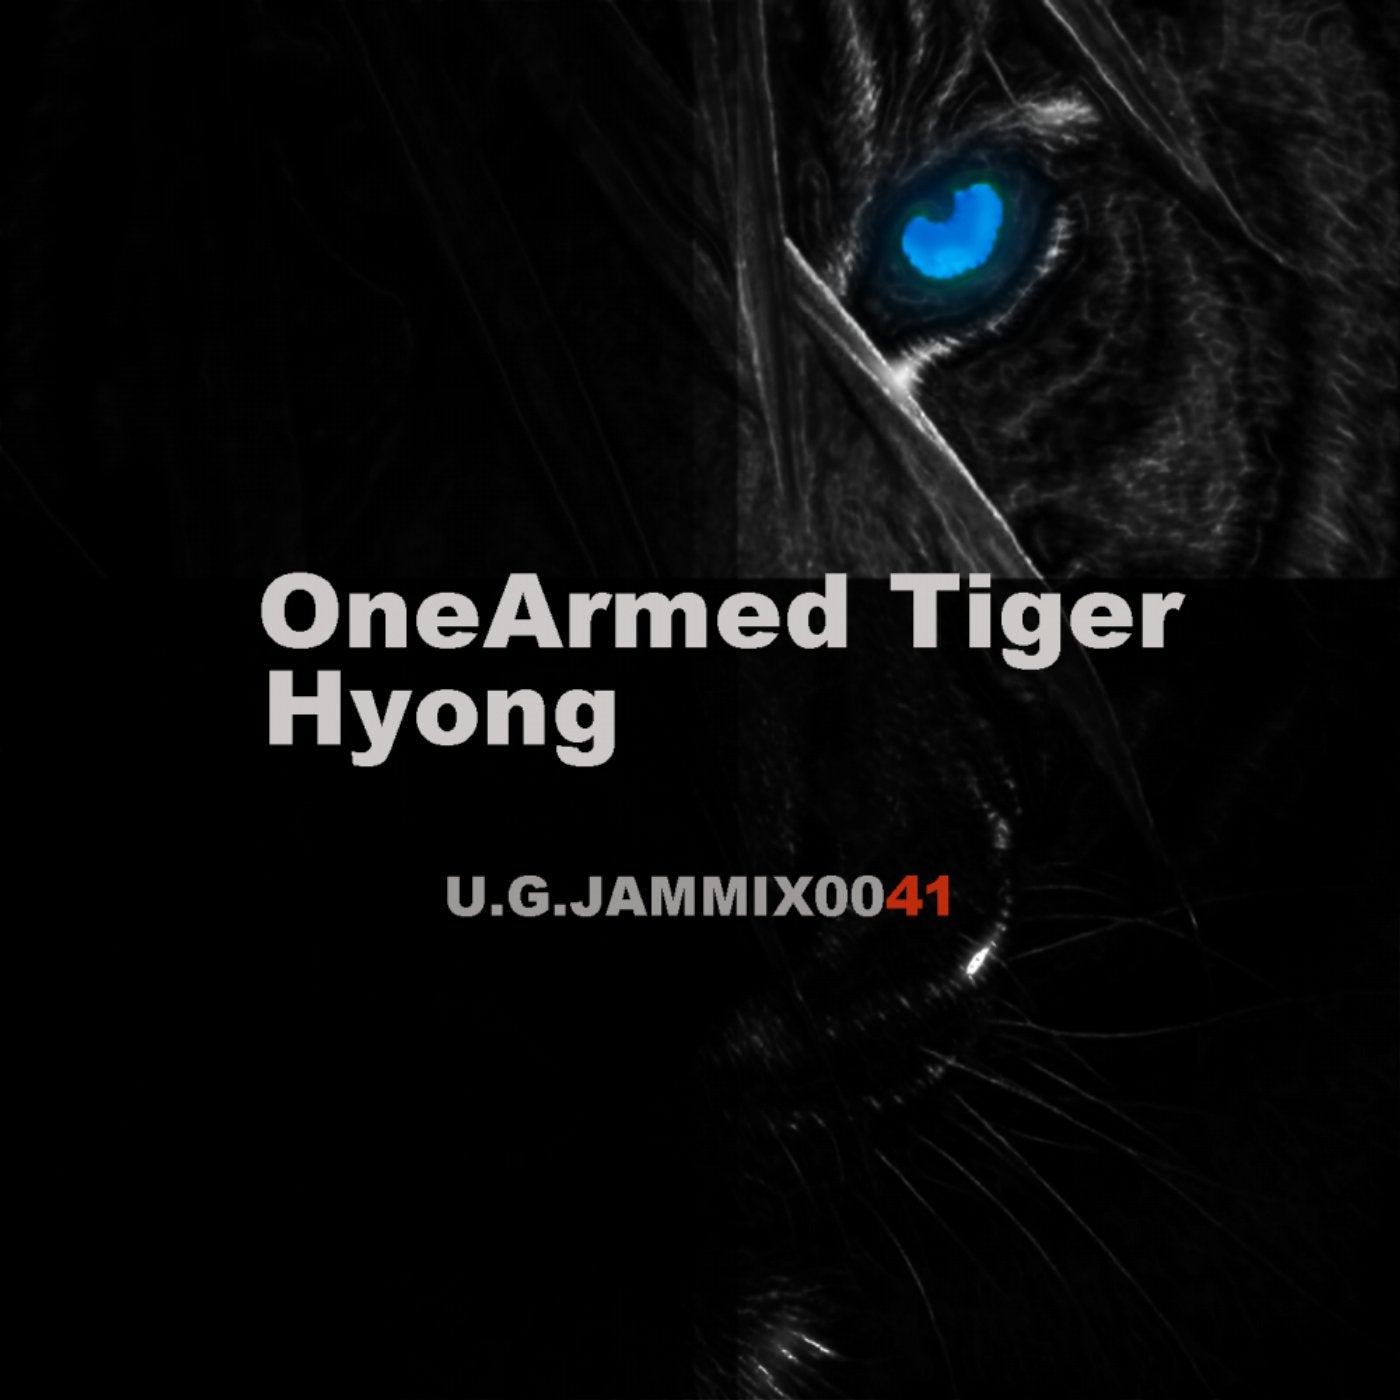 OneArmed Tiger Hyong